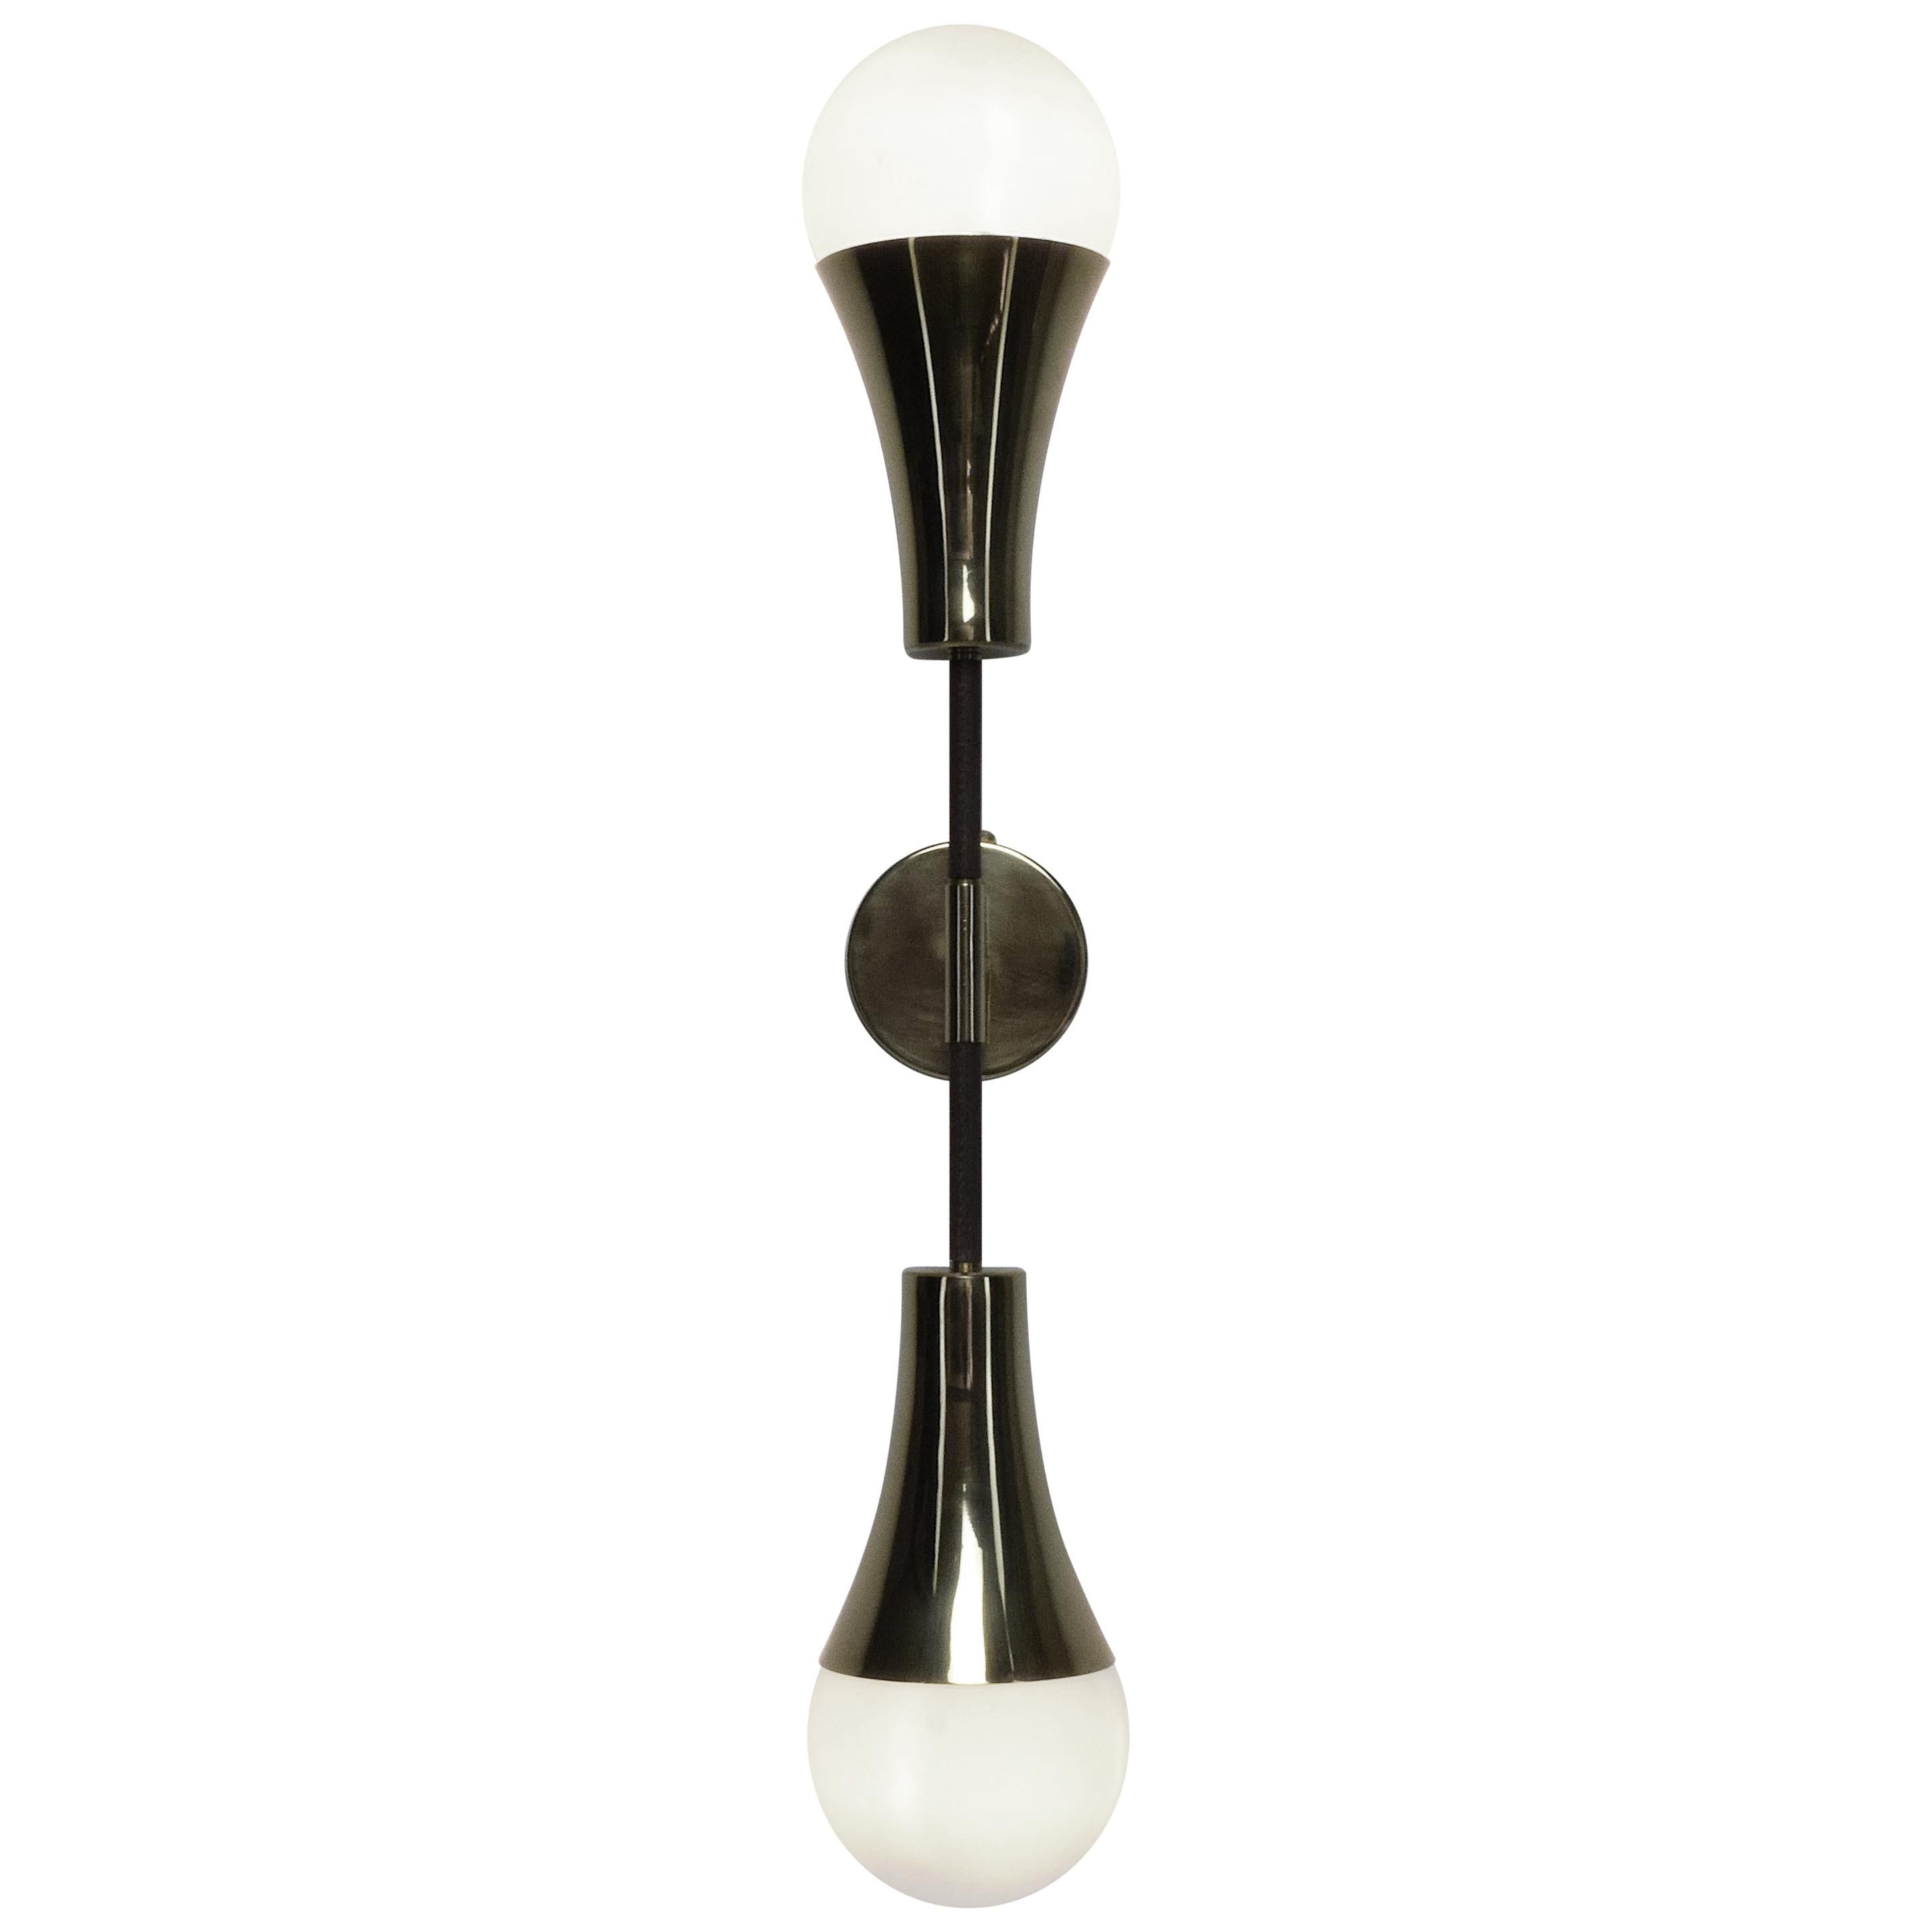 Ancora-V Contemporary Brass Wall Light, Flow Collection